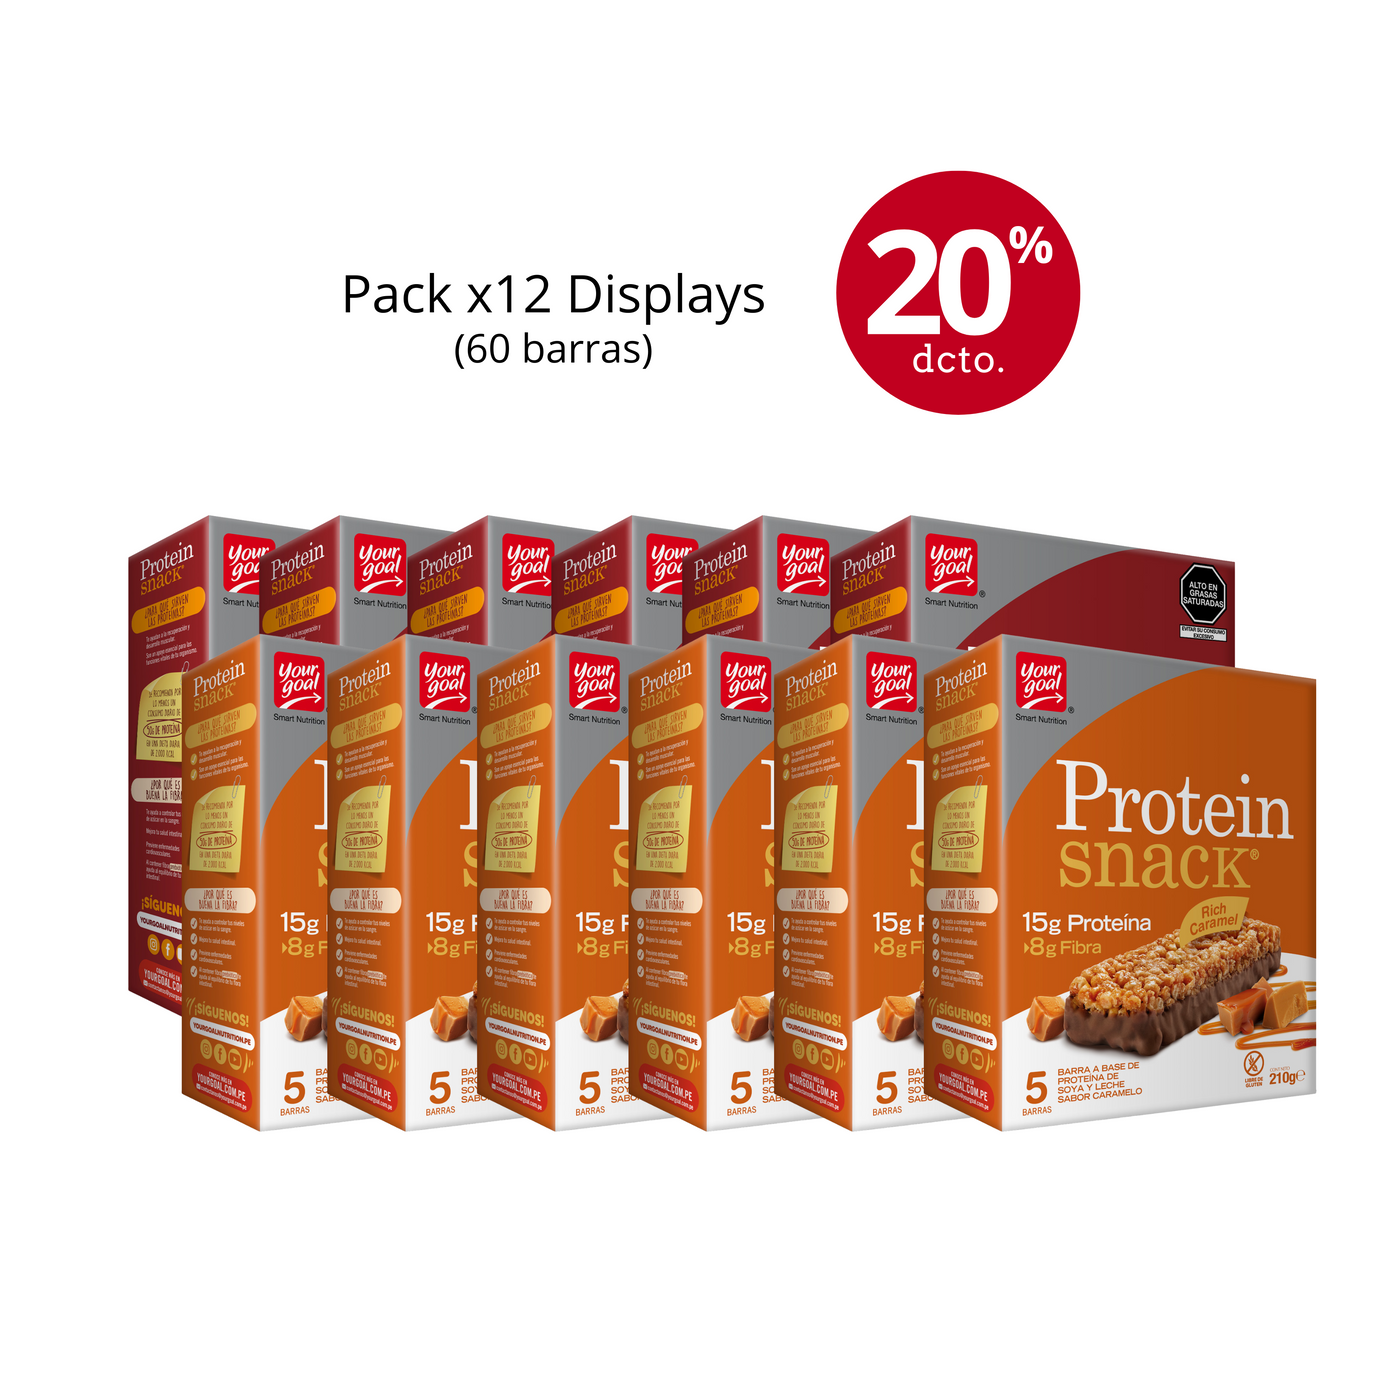 PACK X12 DISPLAYS PROTEIN SNACK (60 BARRAS)